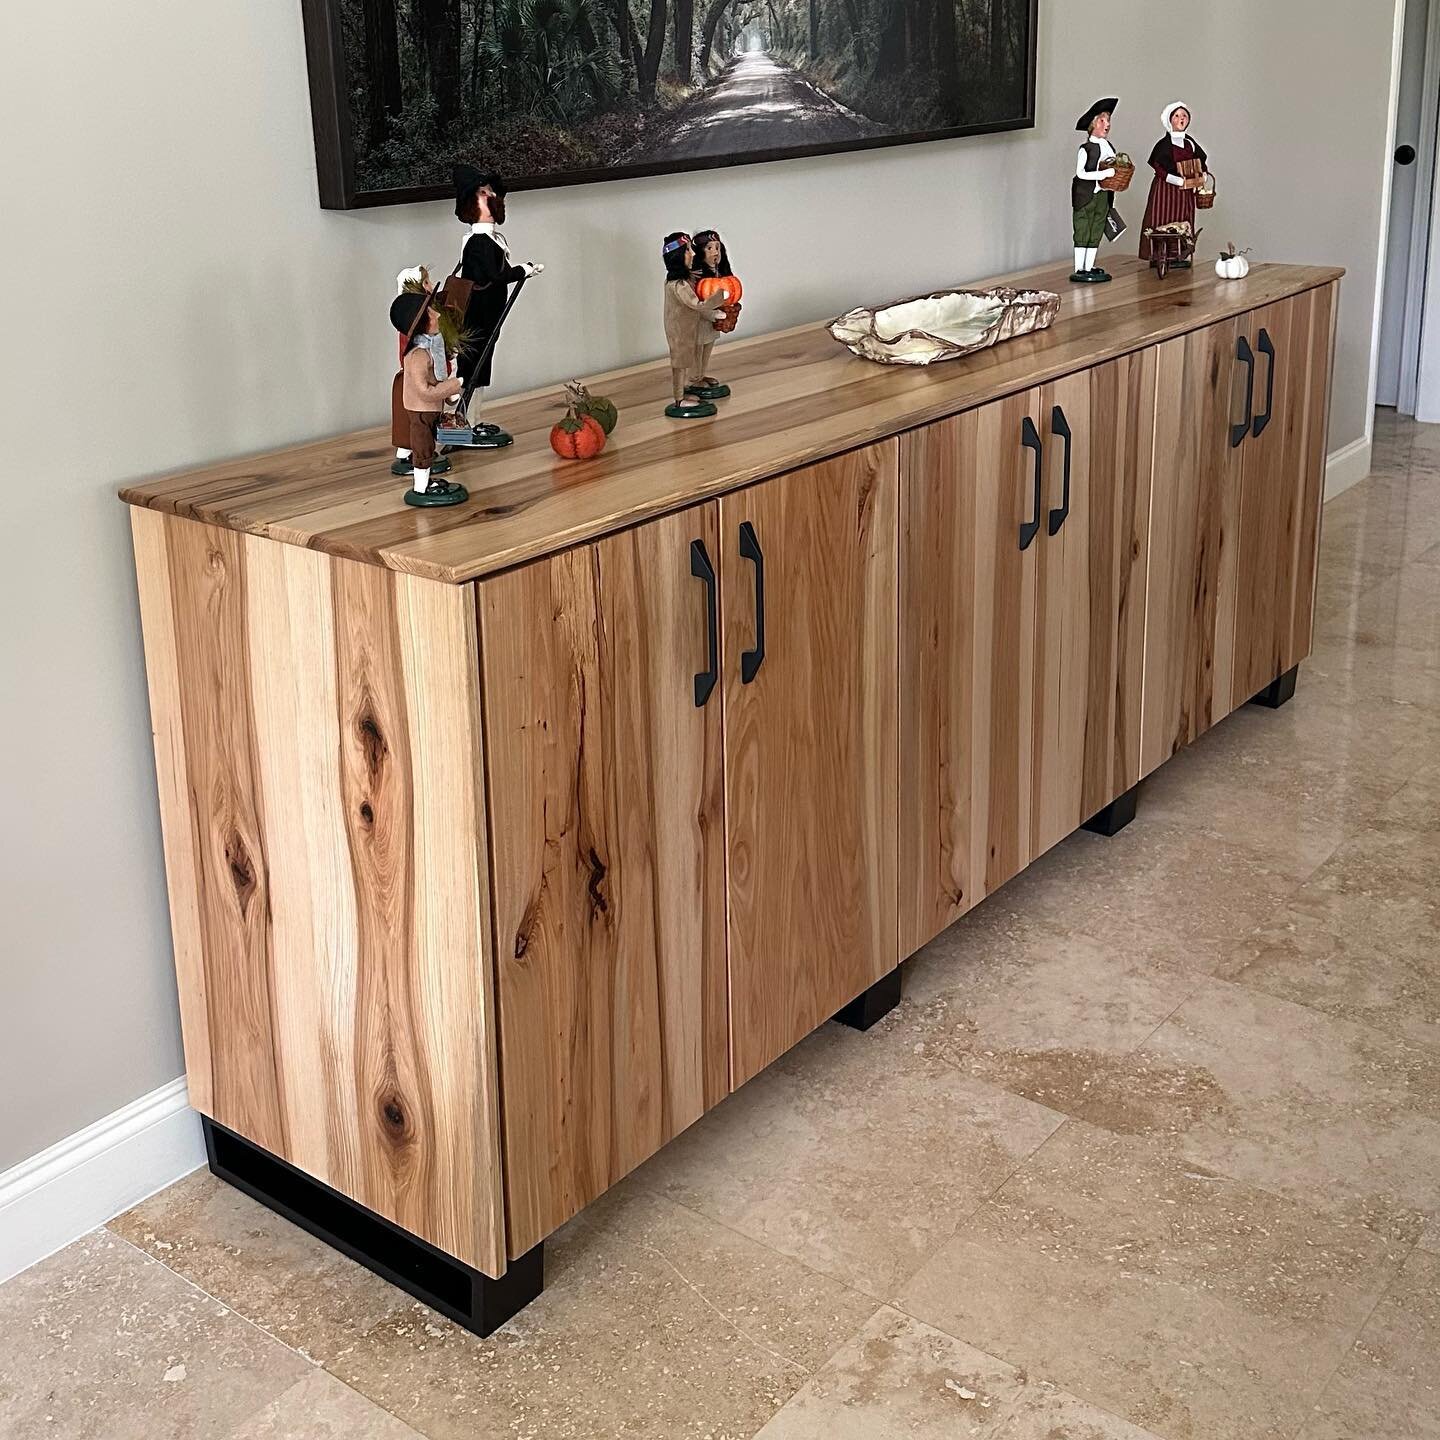 Modern Pecan Credenza with grain matched doors, sides, and top. 

Pecan and hickory trees are basically the same tree. They have very similar grain textures and colors. The main difference is the size of the nut produced. 

#woodworking #customfurnit